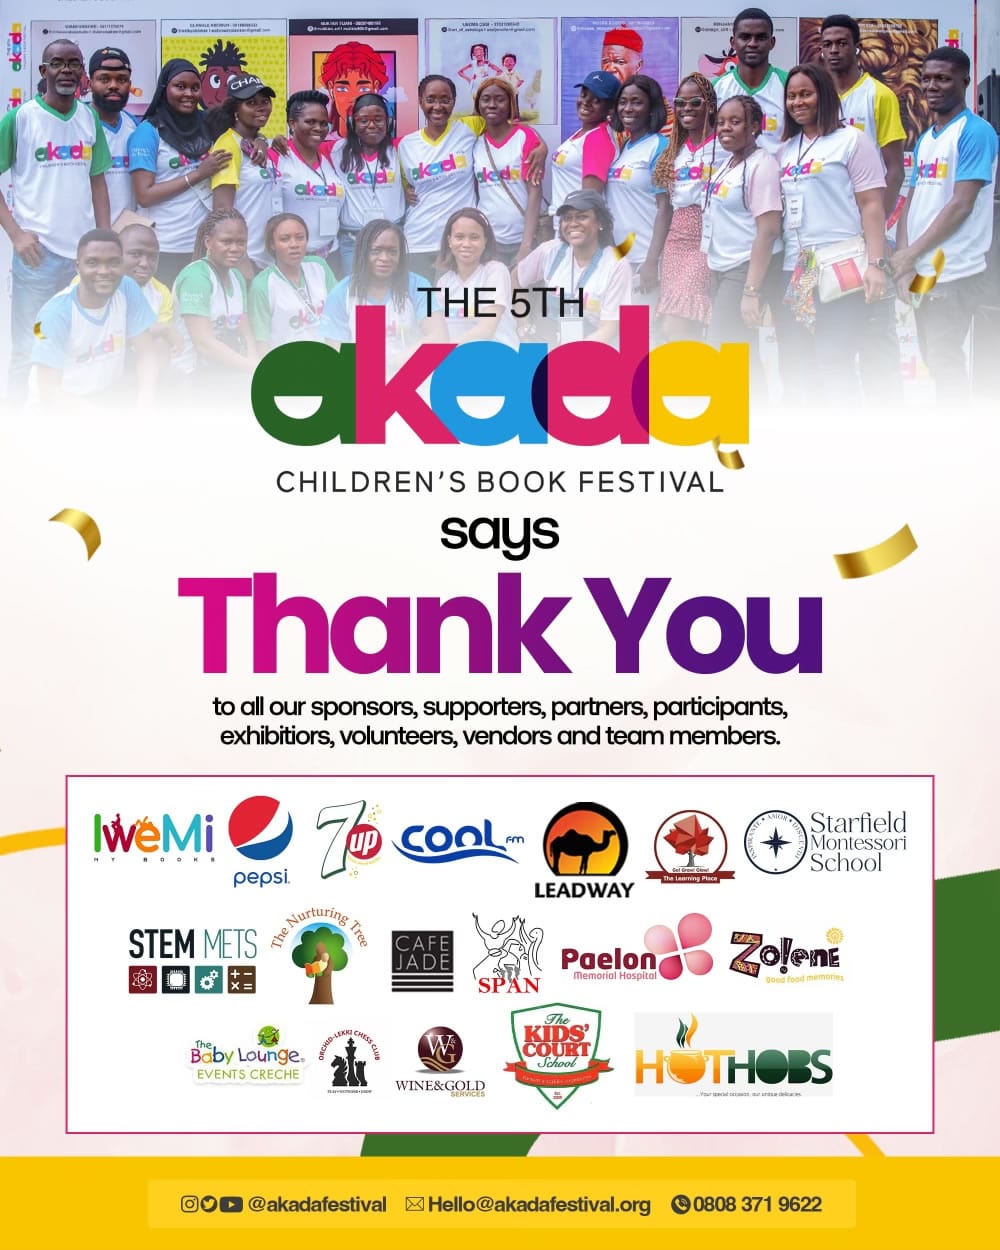 The 5th Akada Children's Book Festival Says Thank You